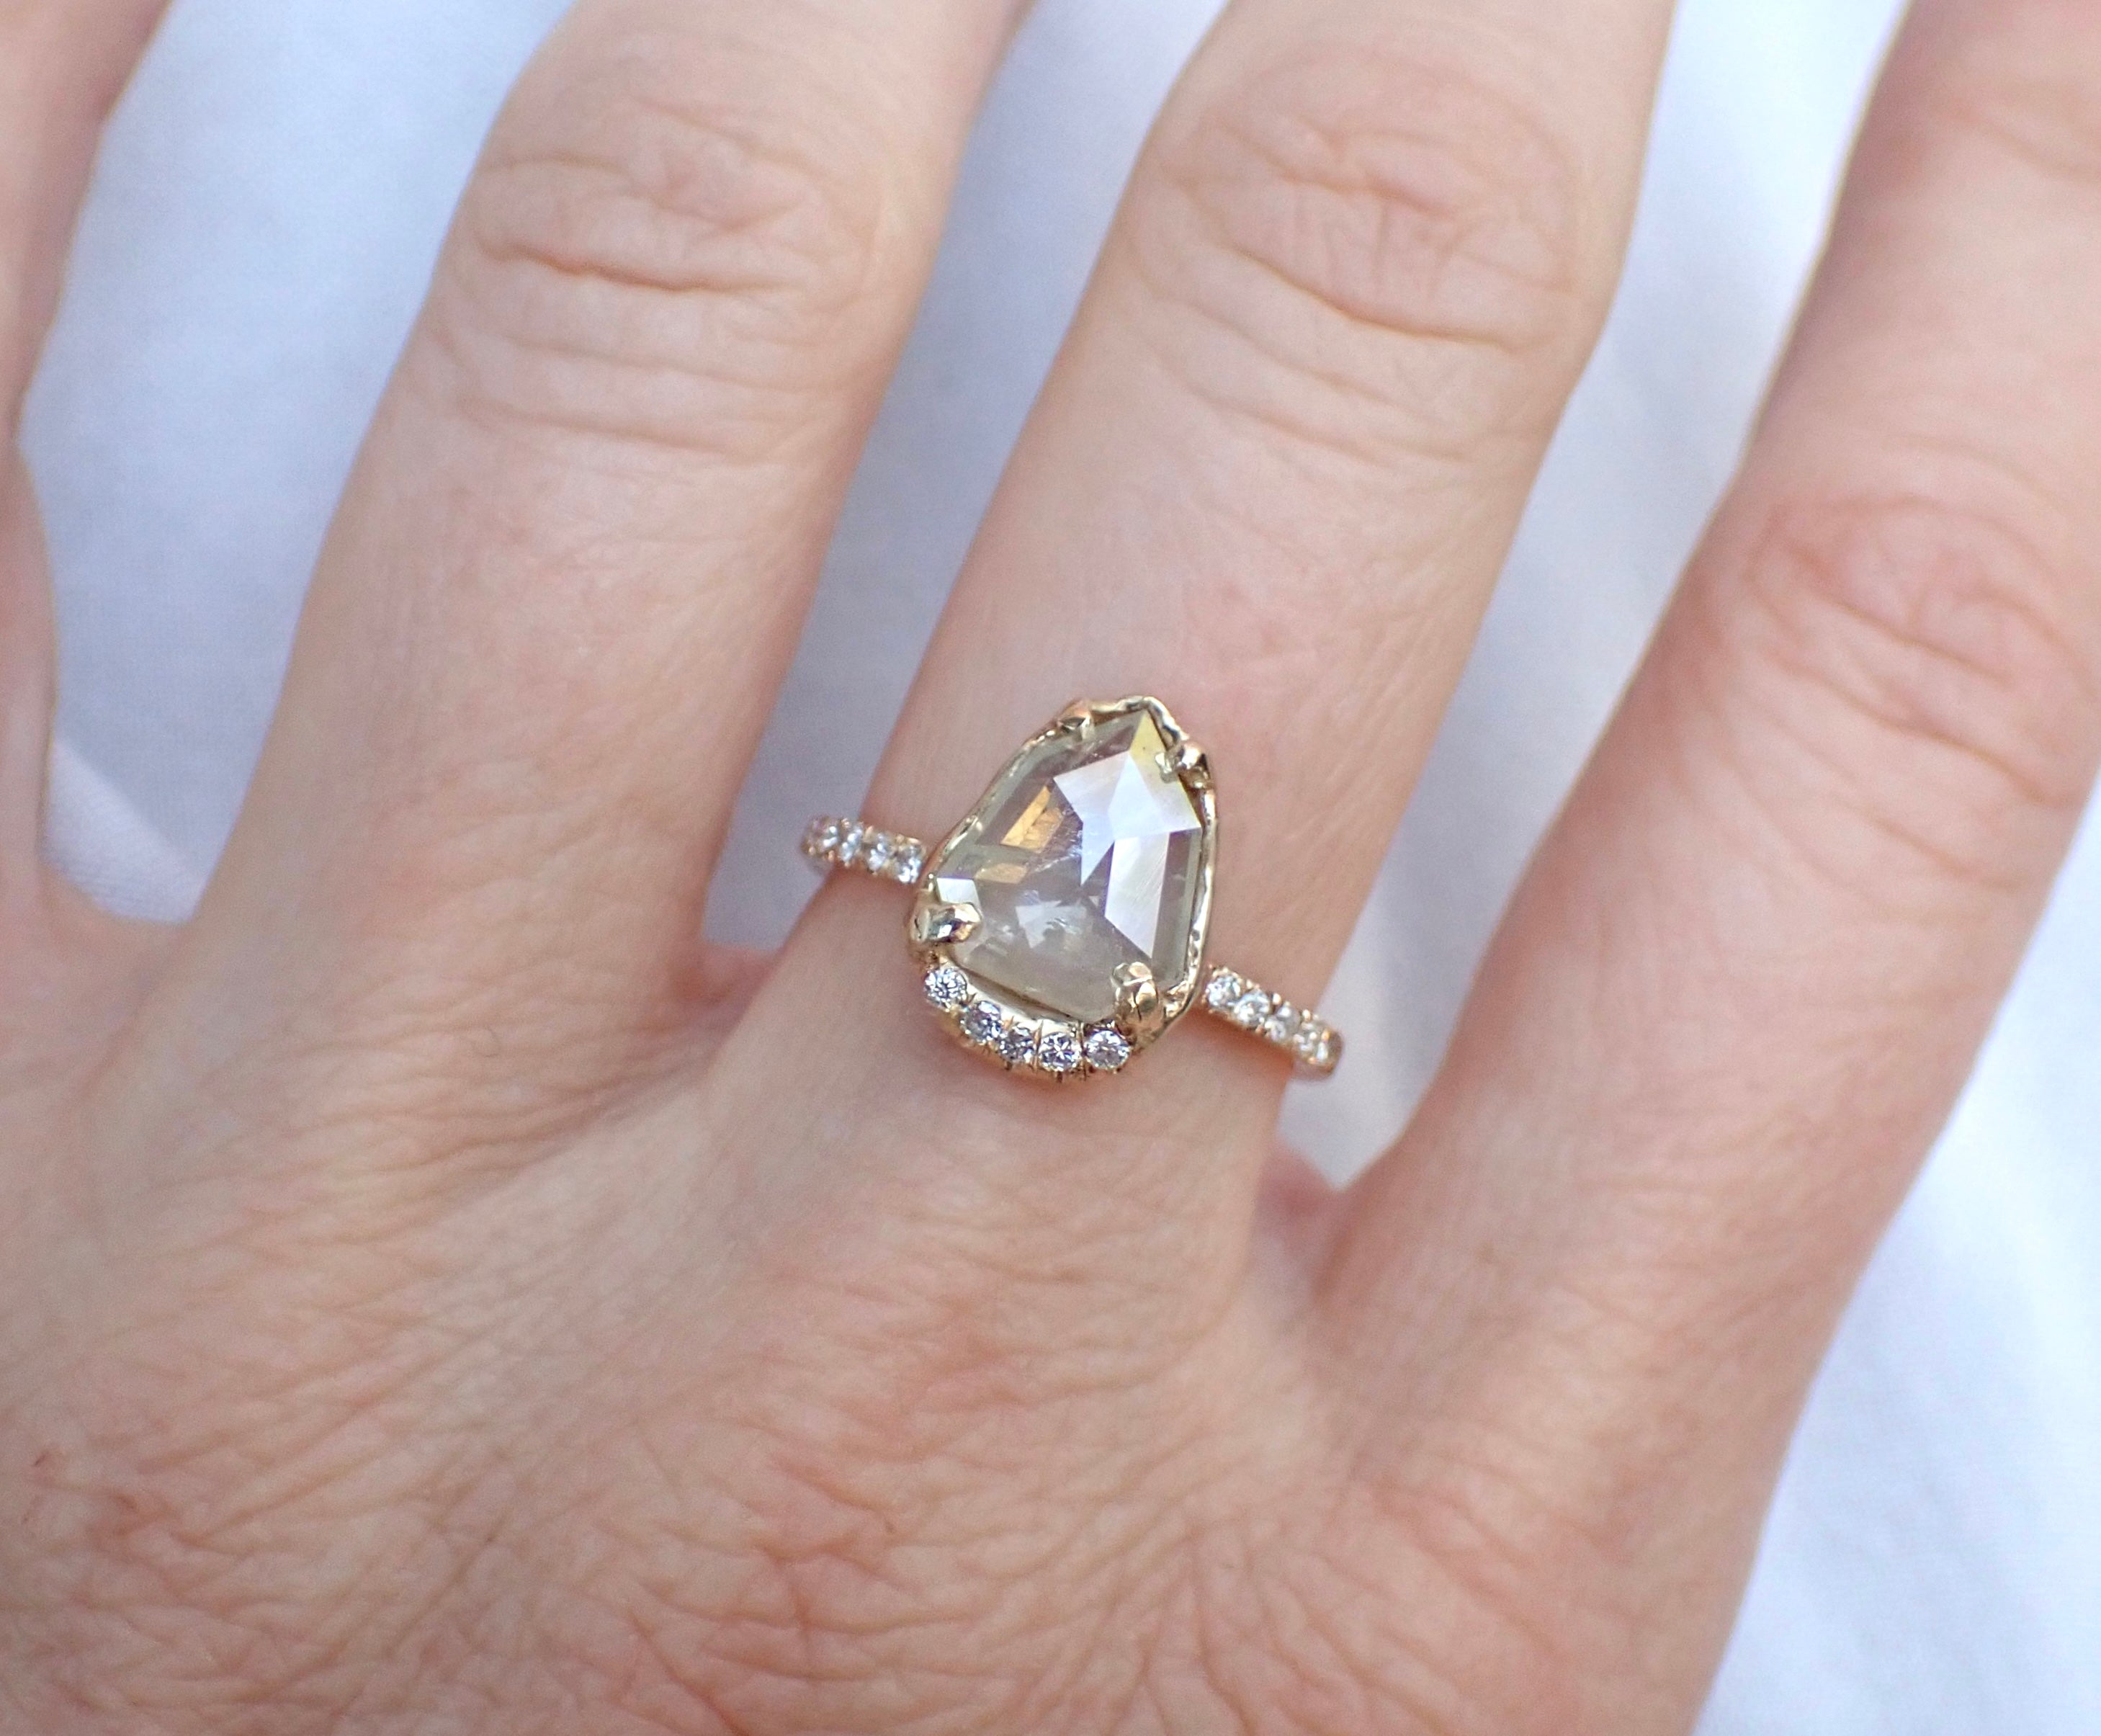 The Most Popular Engagement Ring Styles For 2022 And Beyond